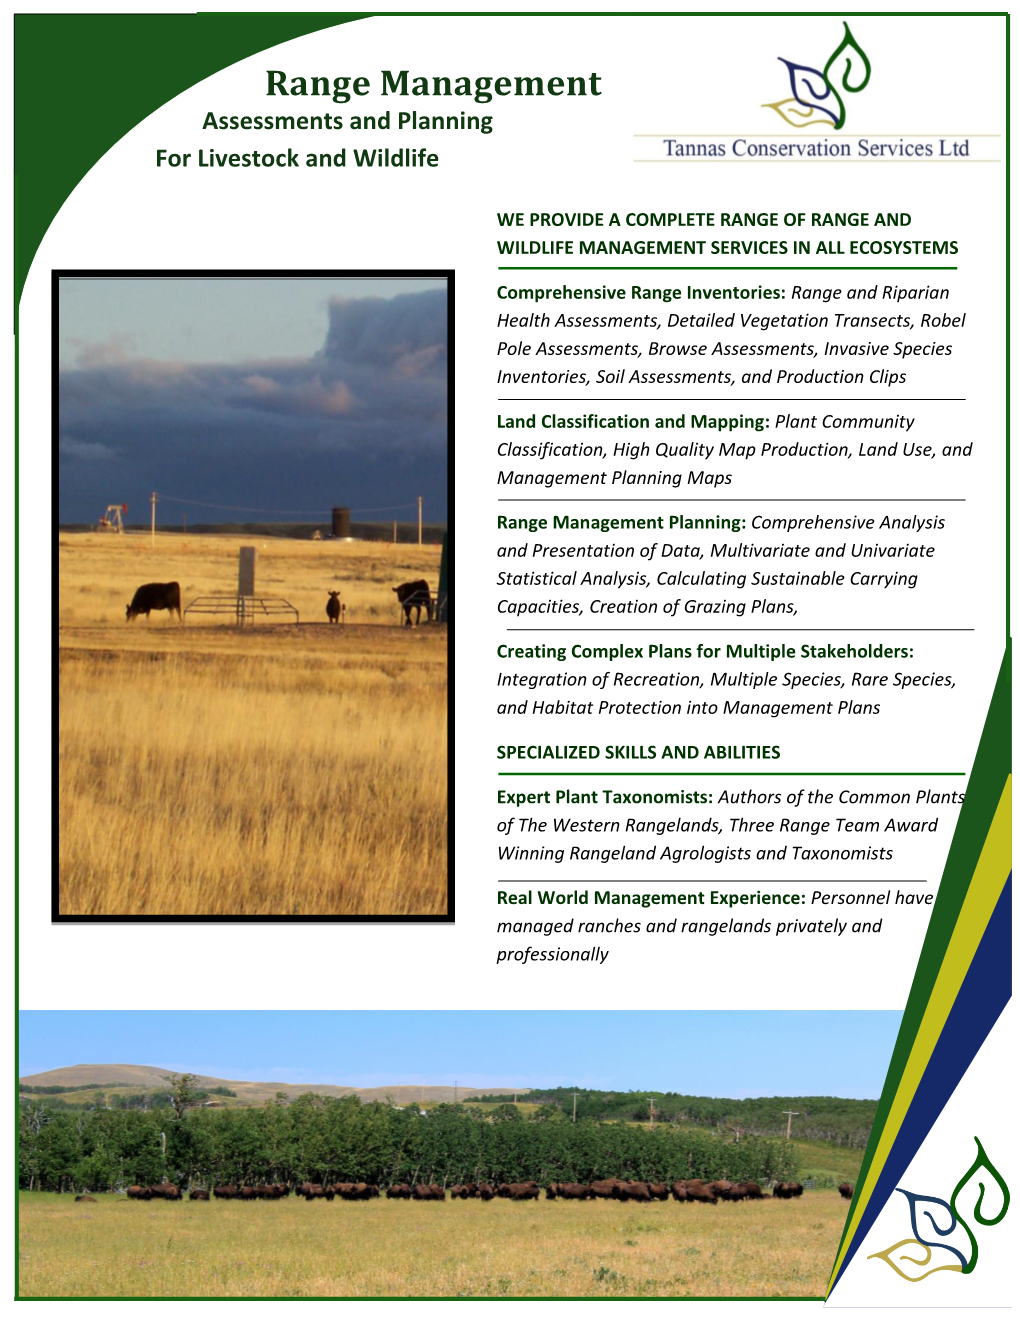 Range Management Assessments and Planning for Livestock and Wildlife